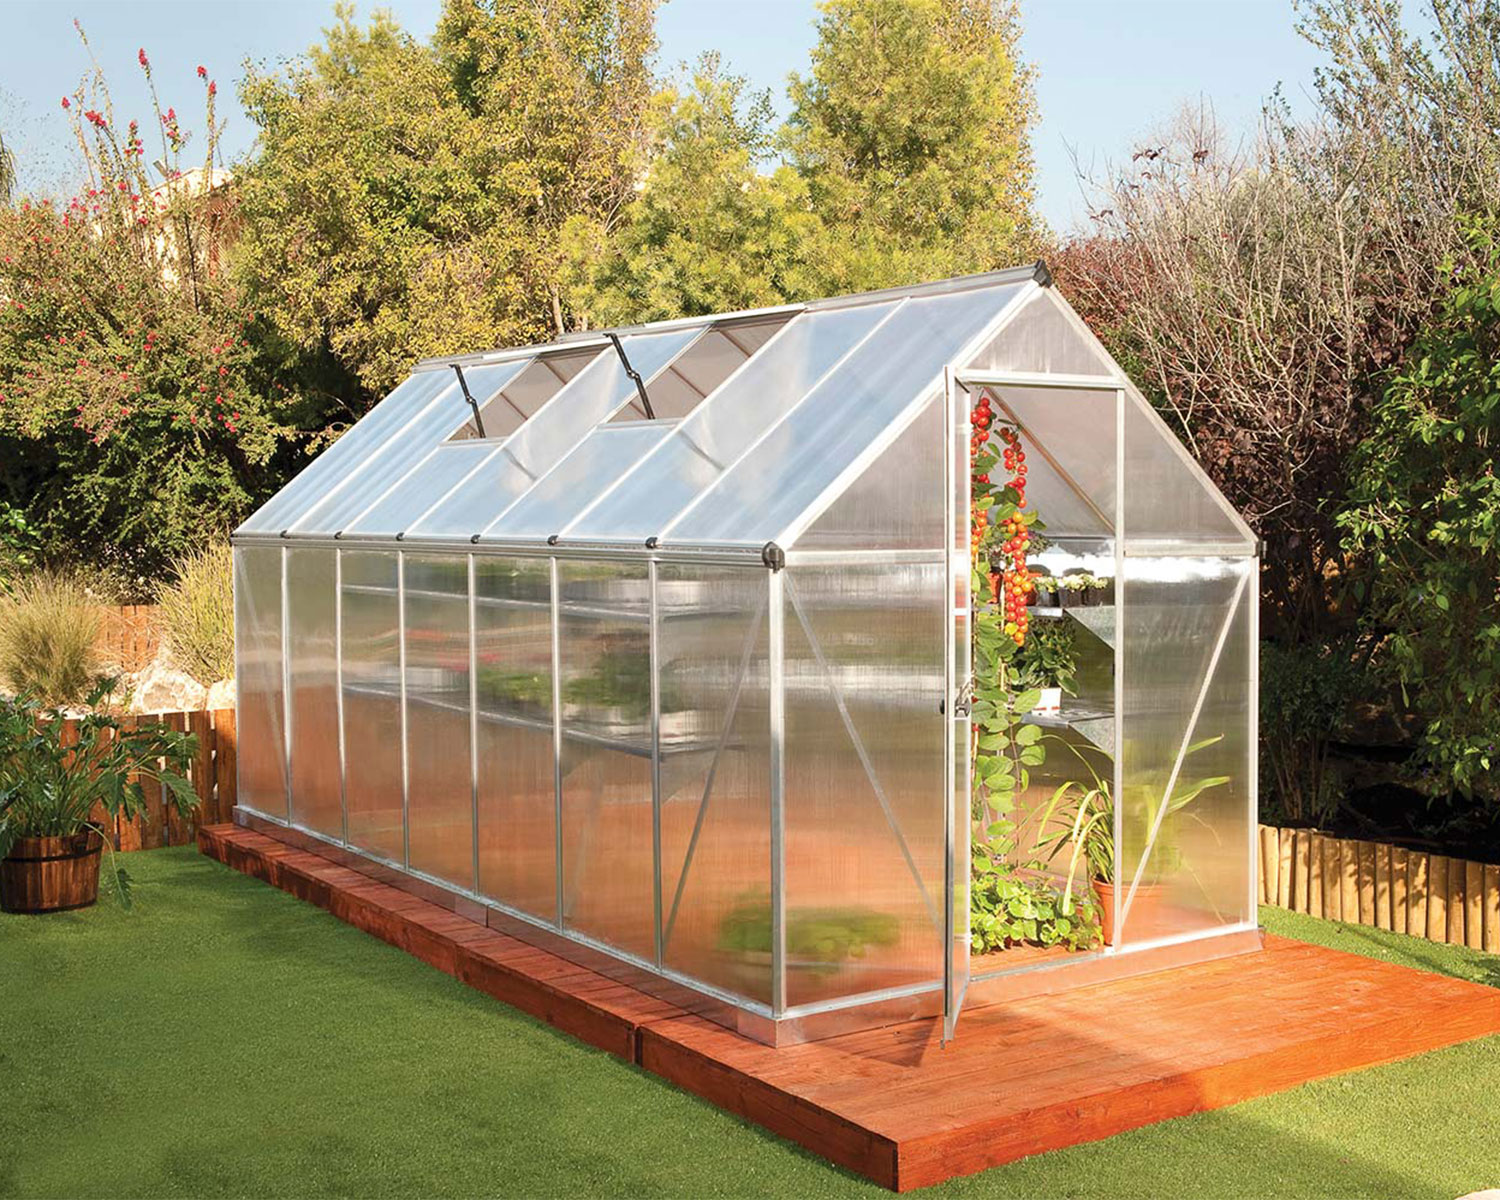 Greenhouse Mythos 6 ft. x 14 ft. Kit - Silver Structure & Twinwall Panels outside on a lawn